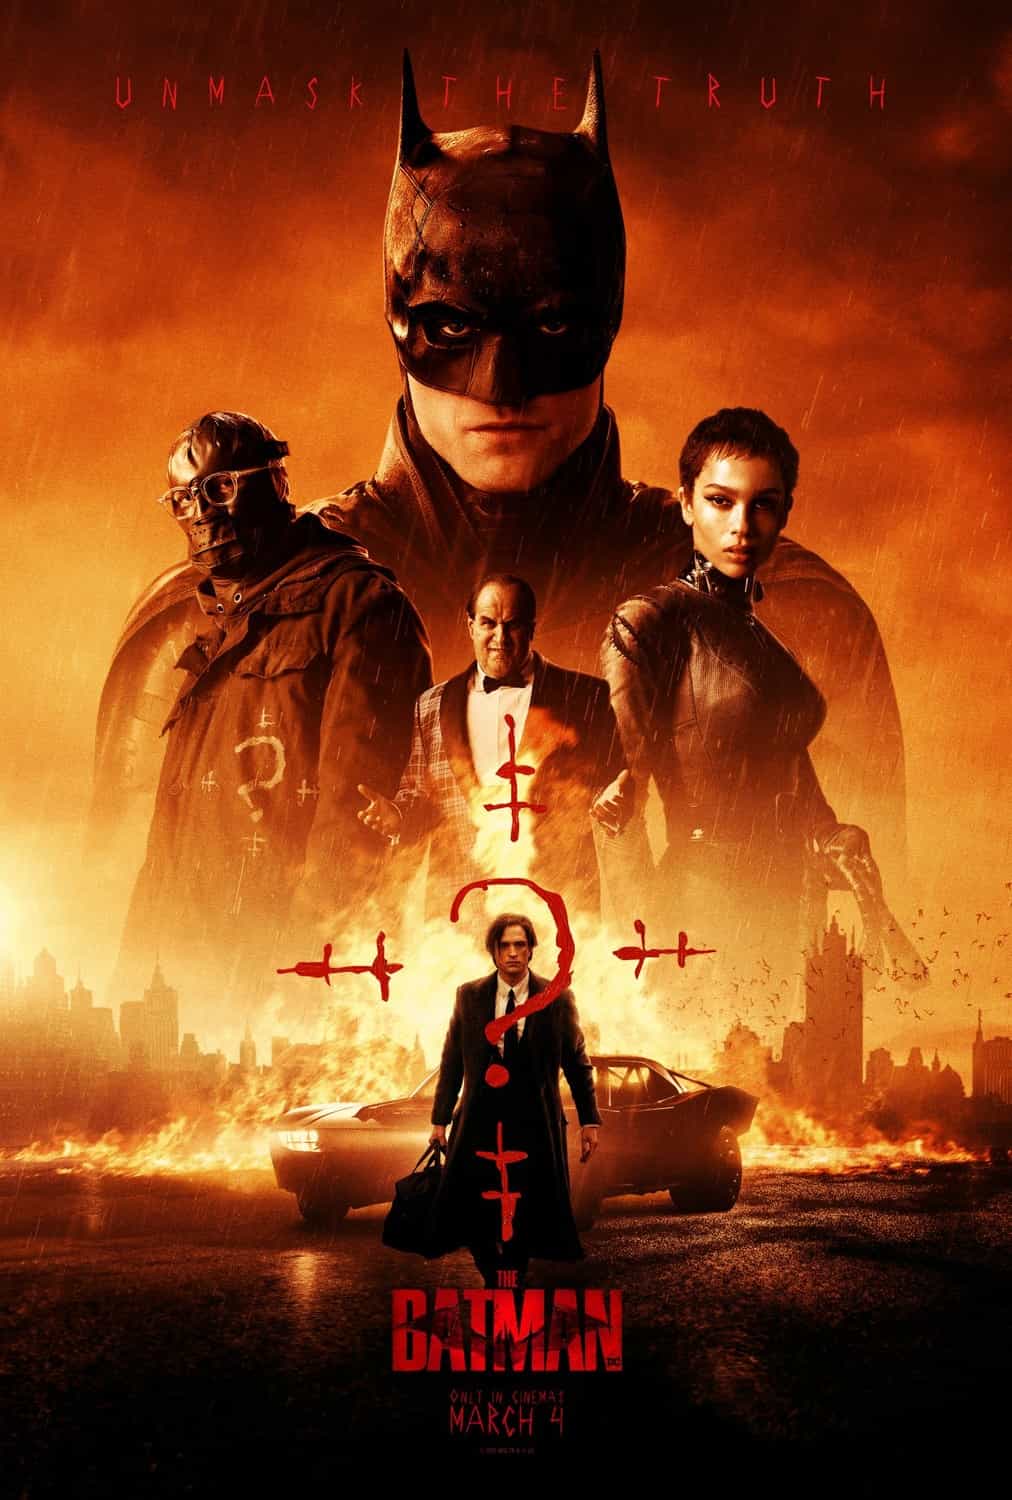 World Box Office Weekend Report 25th - 27th March 2022: Batman remains at the top while The Lost City is the top new movie at number 2